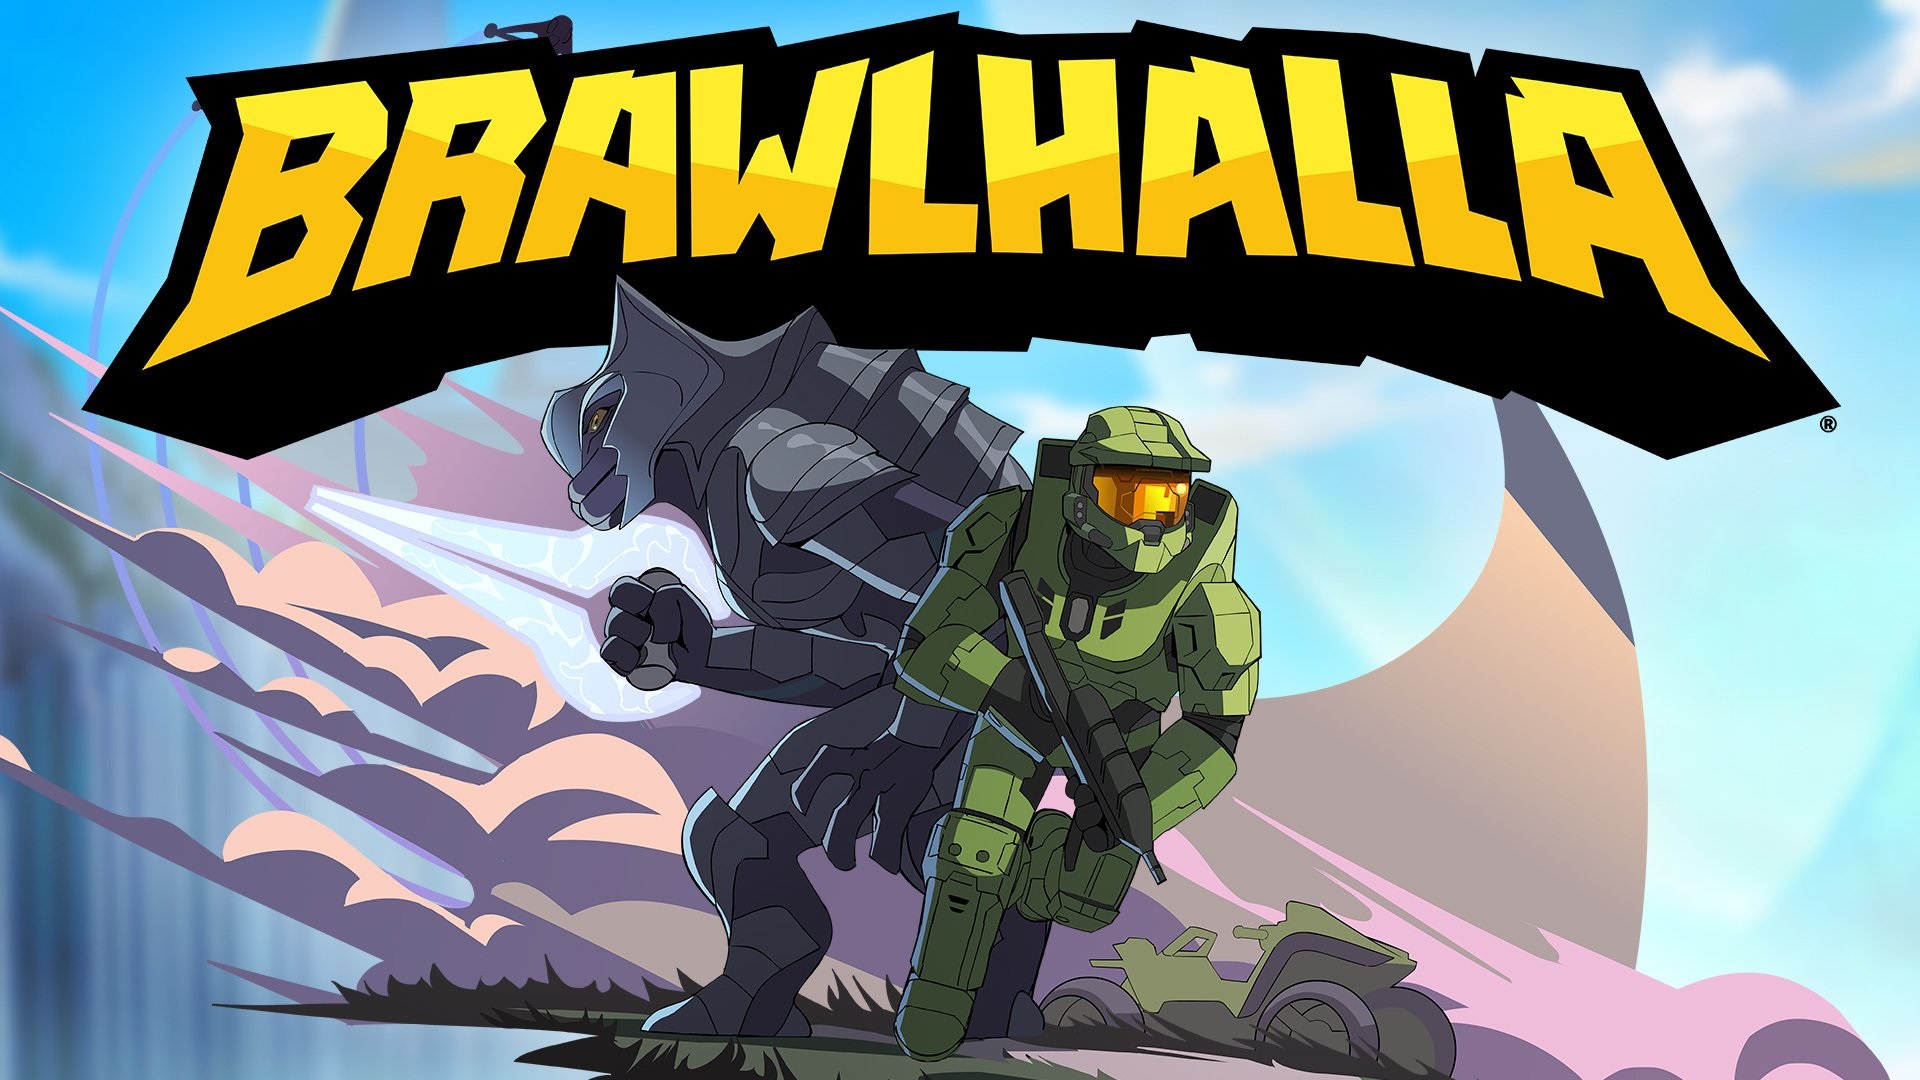 Halo x Brawlhalla partnershop image showing the Master Chief and the Arbiter